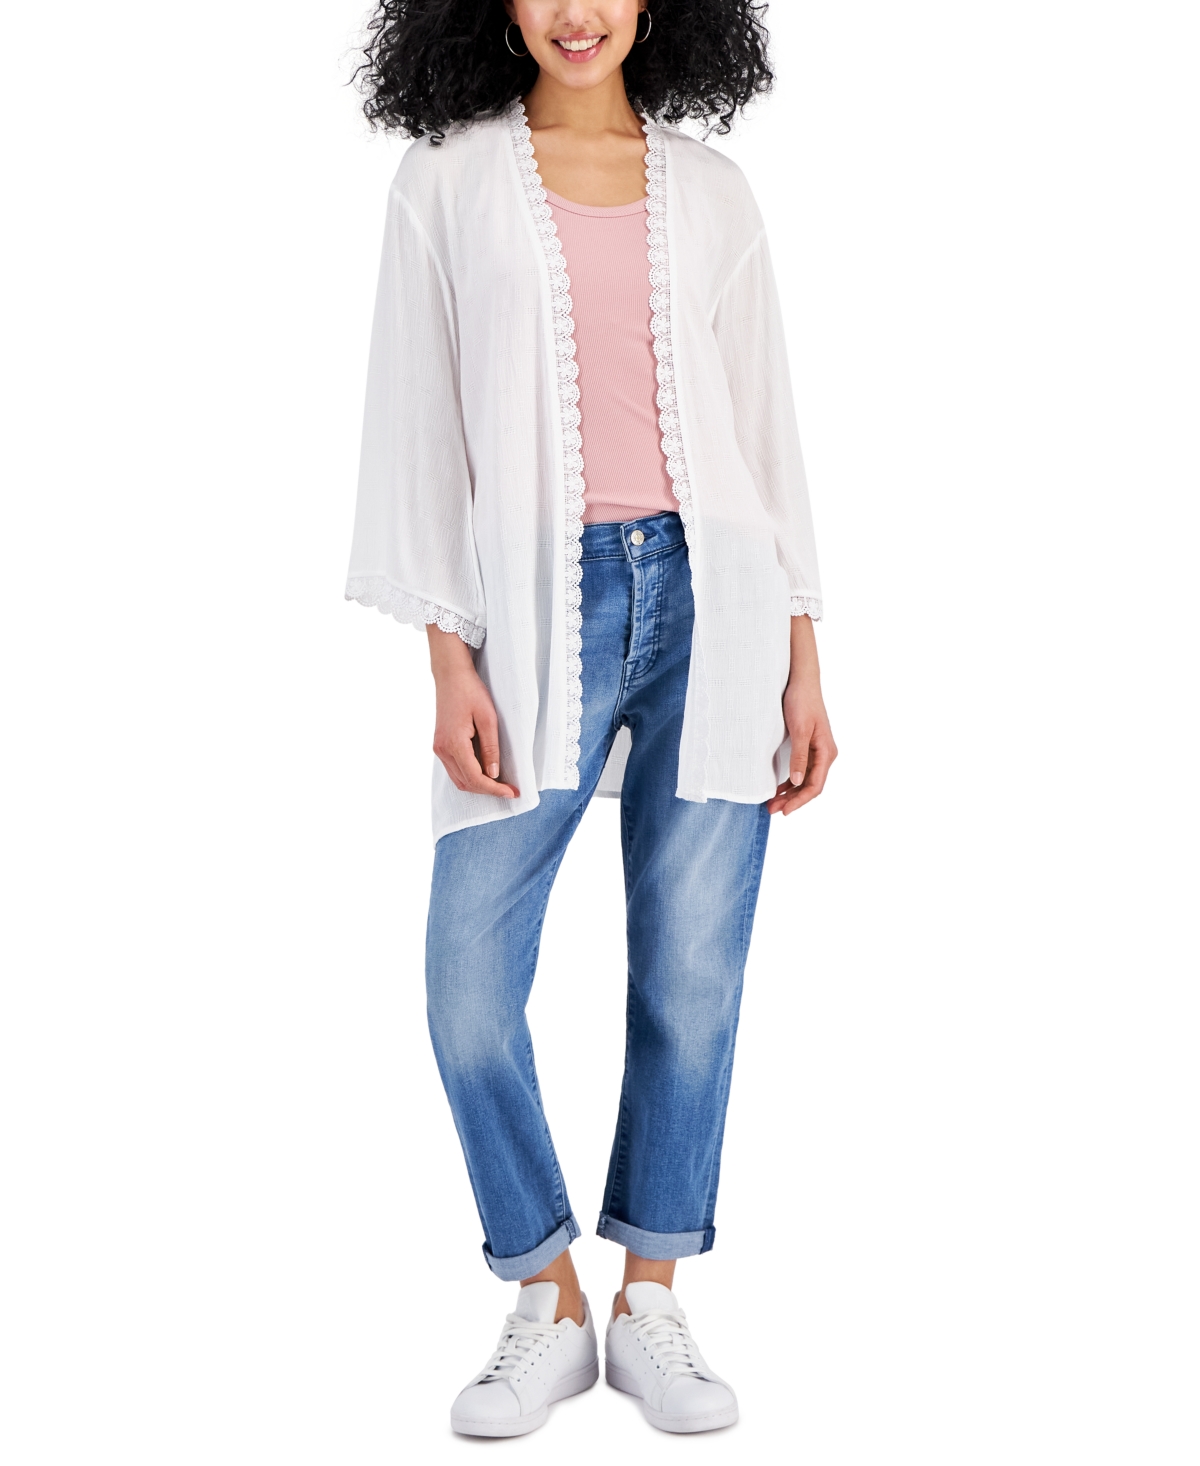 JUNIORS' CROCHET-TRIM KIMONO IN SNOW WHITE Rethink your layering game with Self Esteem's textured kimono. This open-front piece features scalloped crochet trim, too. Juniors Juniors' Clothing - Jackets & Vests (new)